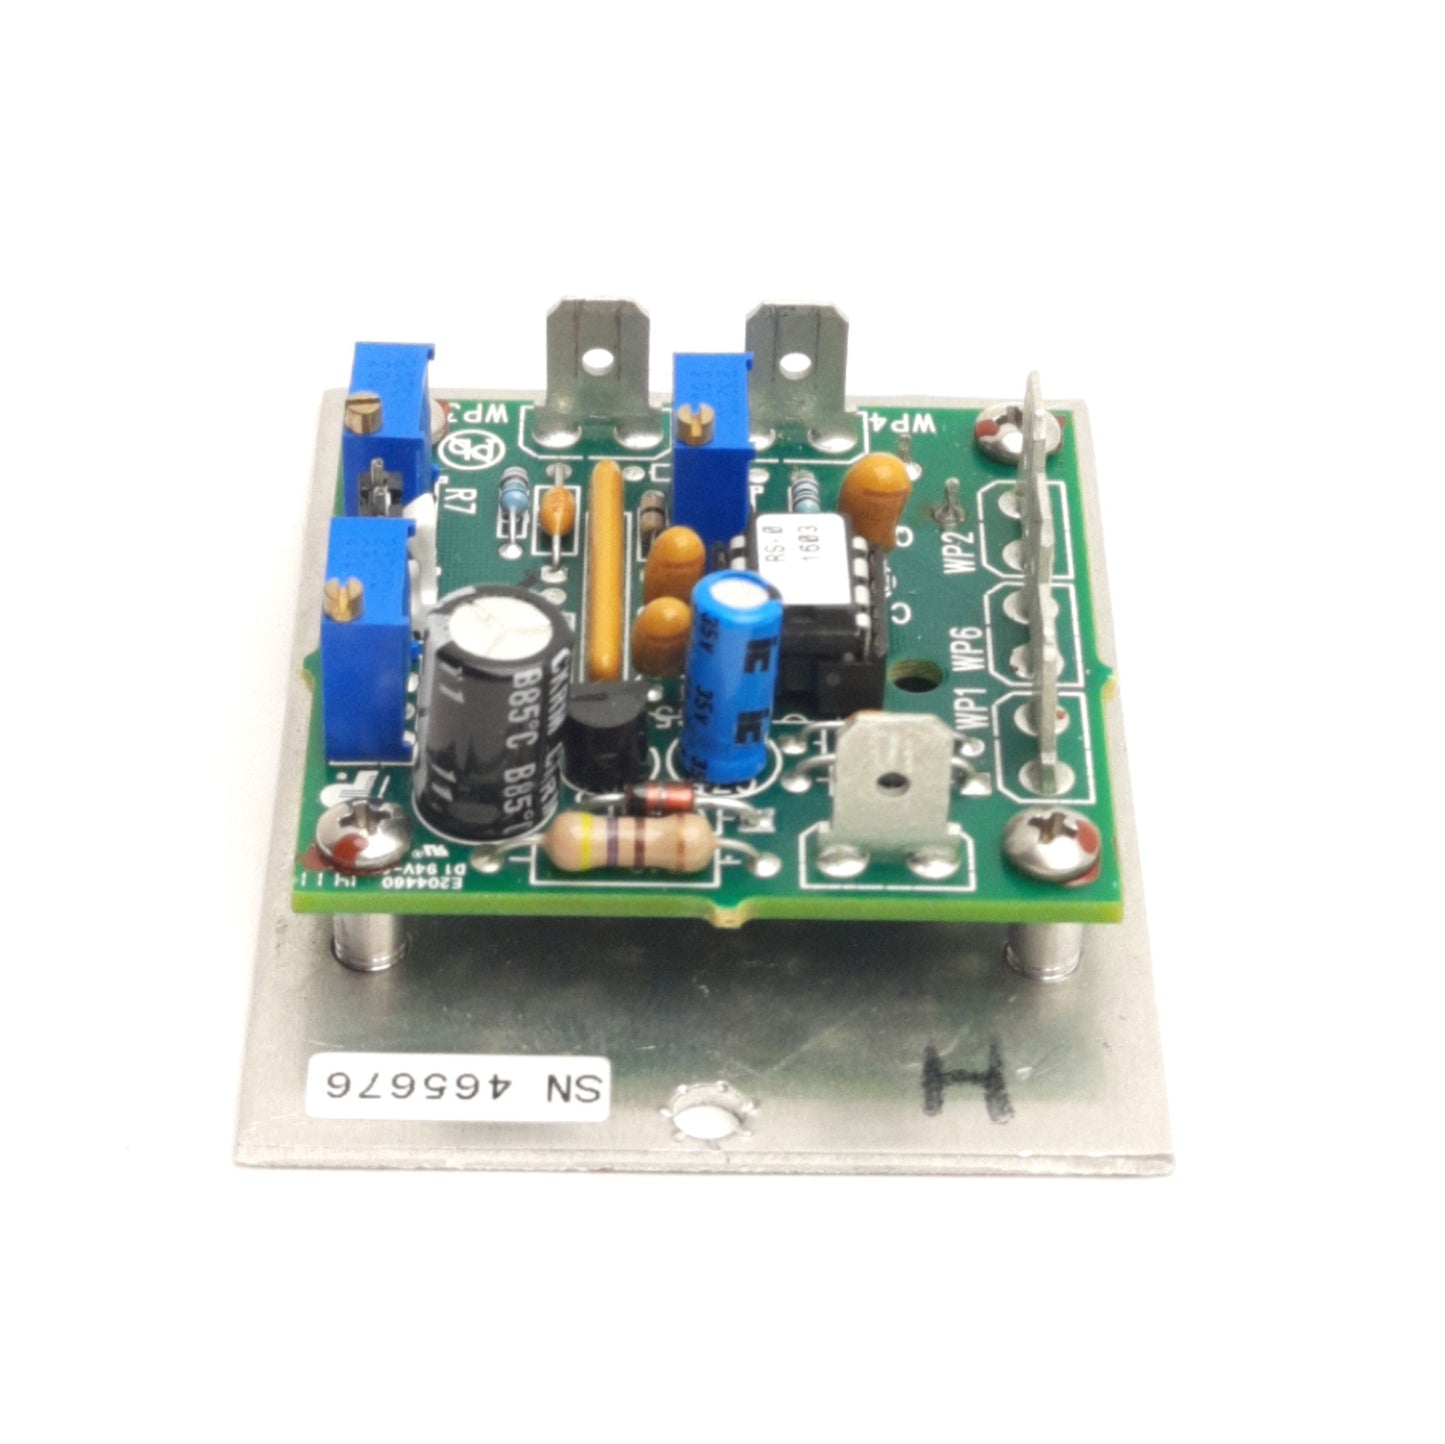 Oven Industries 5R7-357 Thermoelectric Controller, 6-28VDC Input, 450W Output